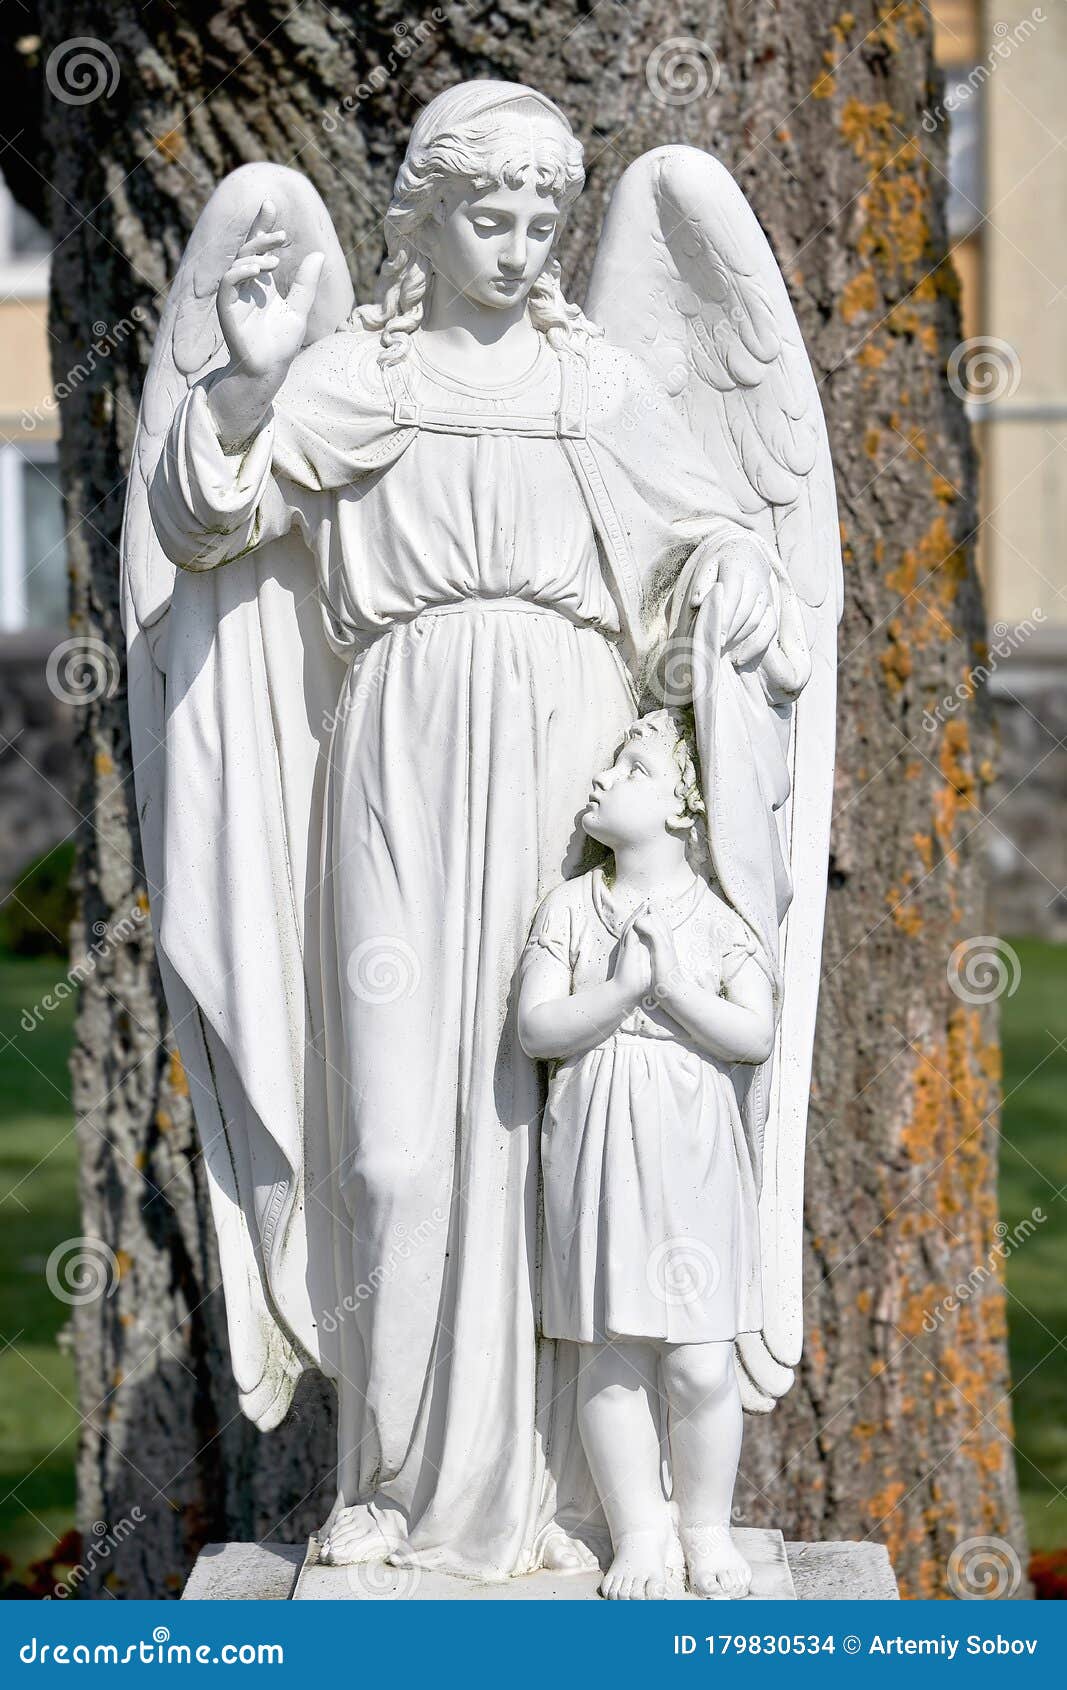 religious monument of the guardian angel. monument to the angel made of white stone